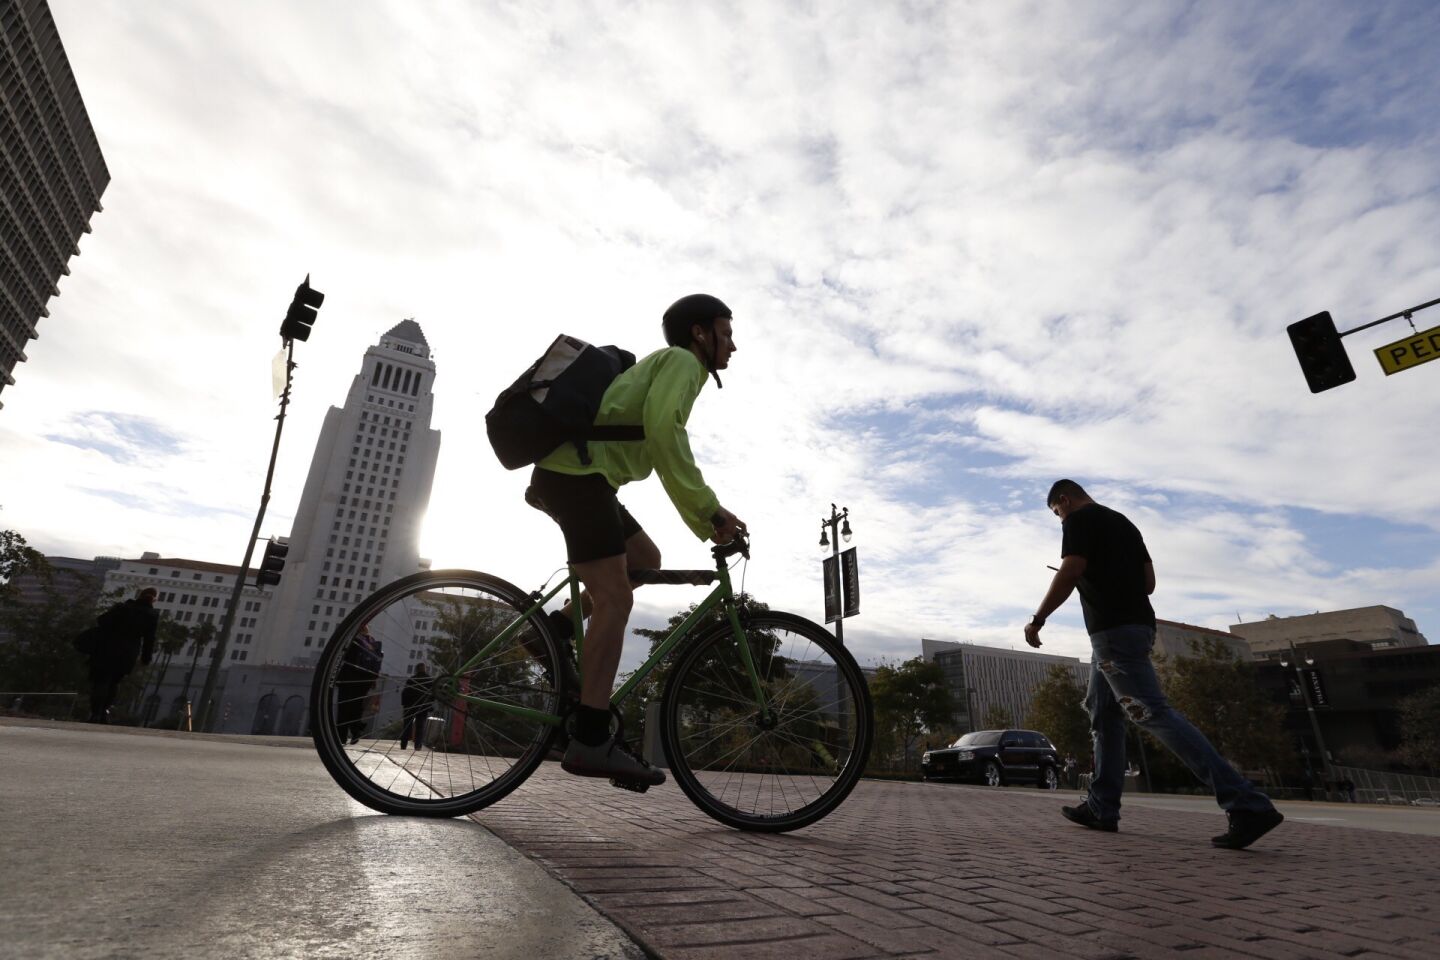 People walk and bike under blue-gray skies in downtown Los Angeles on Jan. 4 as a series of storms were forecast for Southern California.